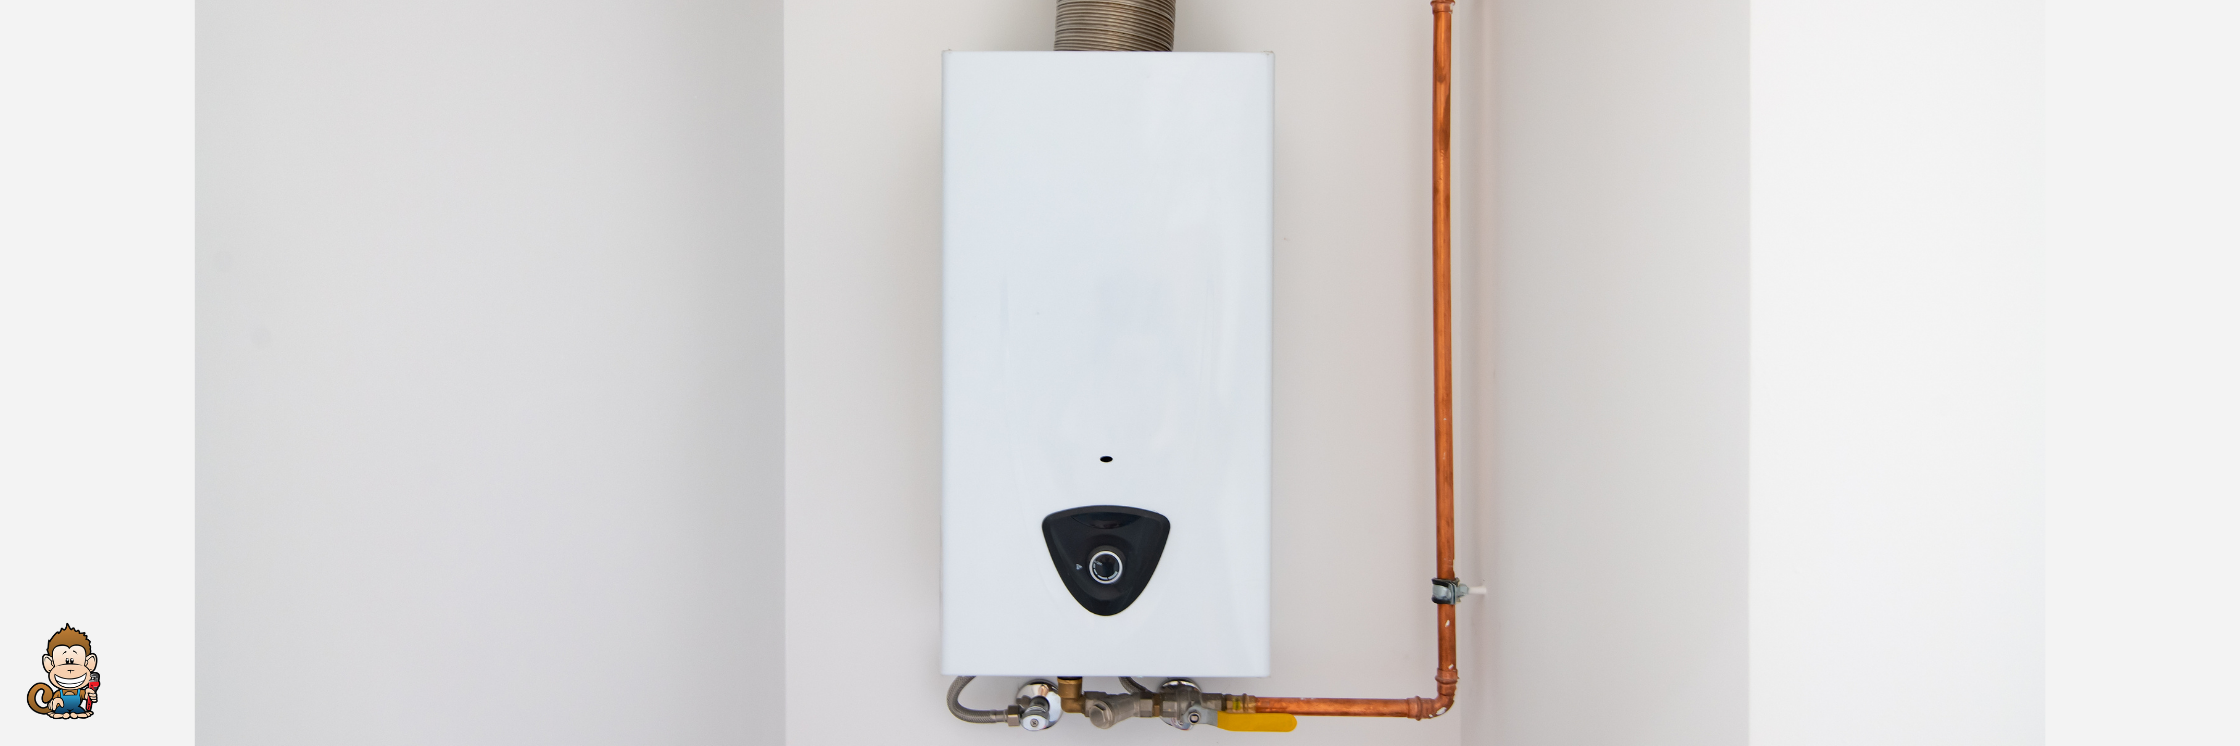 Top 8 Ways Tankless Water Heaters Are Installed Incorrectly